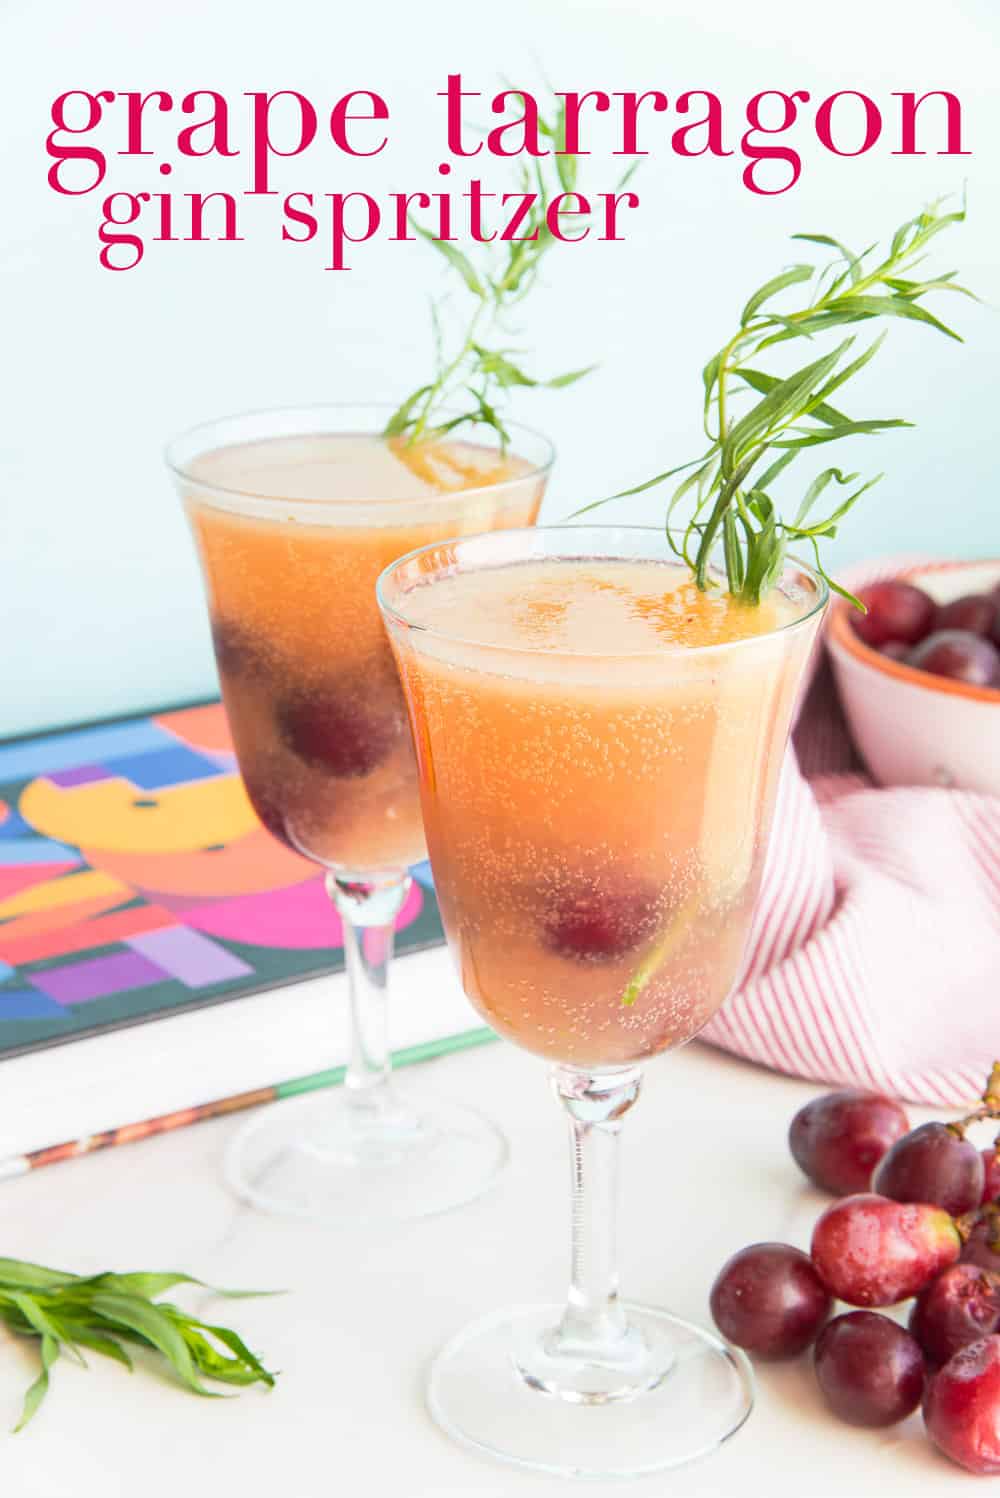 This Grape Tarragon Gin Spritzer is inspired by Bryant Terry's refreshing grape tarragon mocktail. Made boozy with gin, this a great, fruity and herbaceous cocktail to serve at summer parties or at your next brunch. #grapedrink #gincocktail #ginspritzer #mocktail #tarragon #herbs #cocktails #party #cocktailparty #cocktailrecipe #drinkrecipe #Juneteenth #BlackFoodCookbook #eattheculture #JuneteenthCookout2022 via @ediblesense